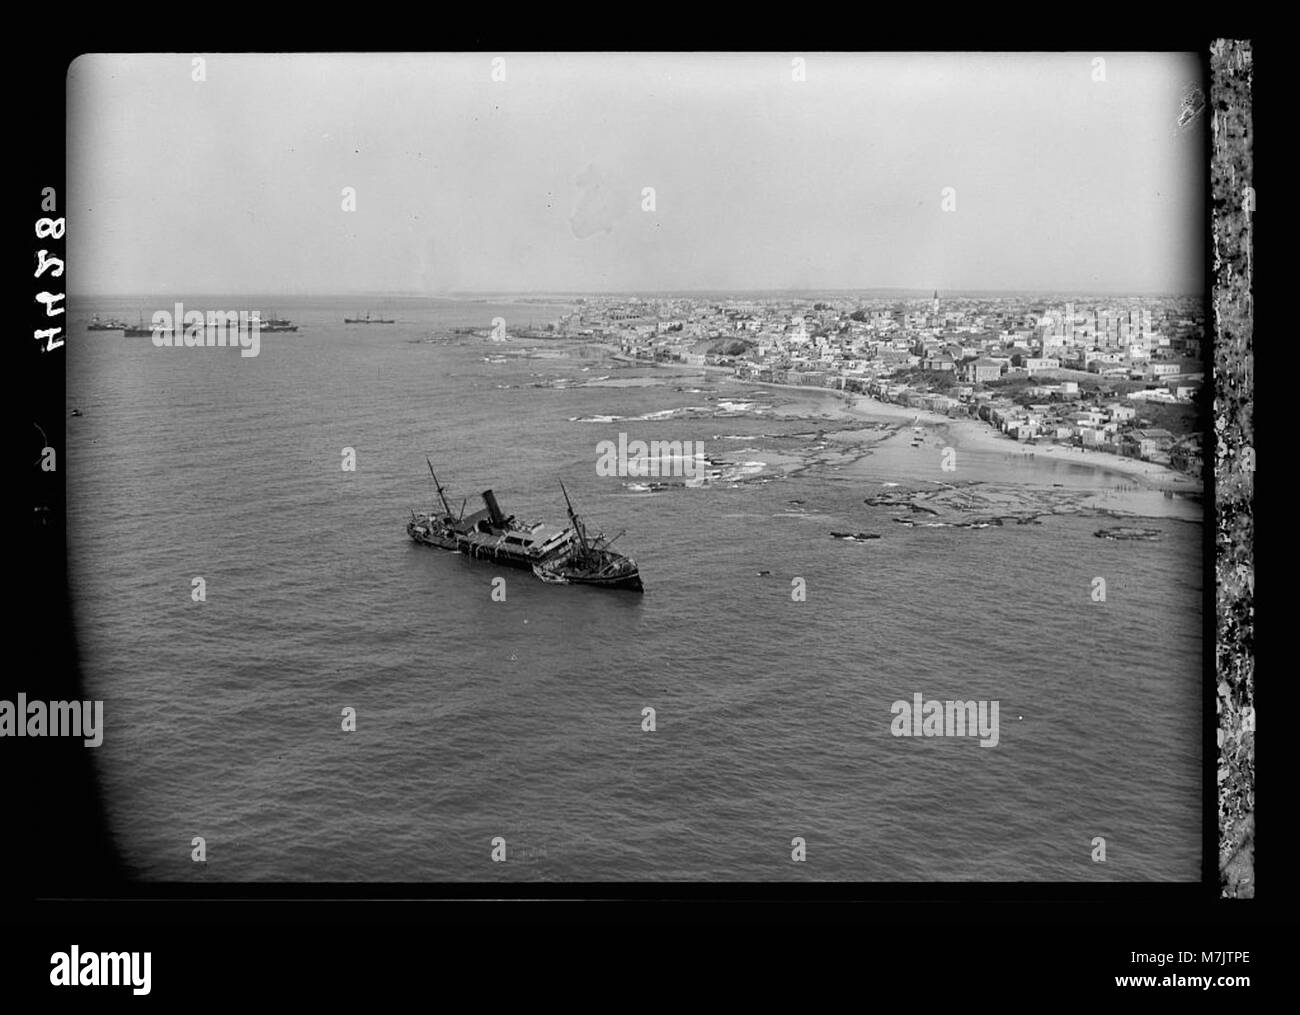 Air views of Palestine. Jaffa, Auji River and Levant Fair. Orange steamer grounded off Jaffa showing rocky coast LOC matpc.15883 Stock Photo